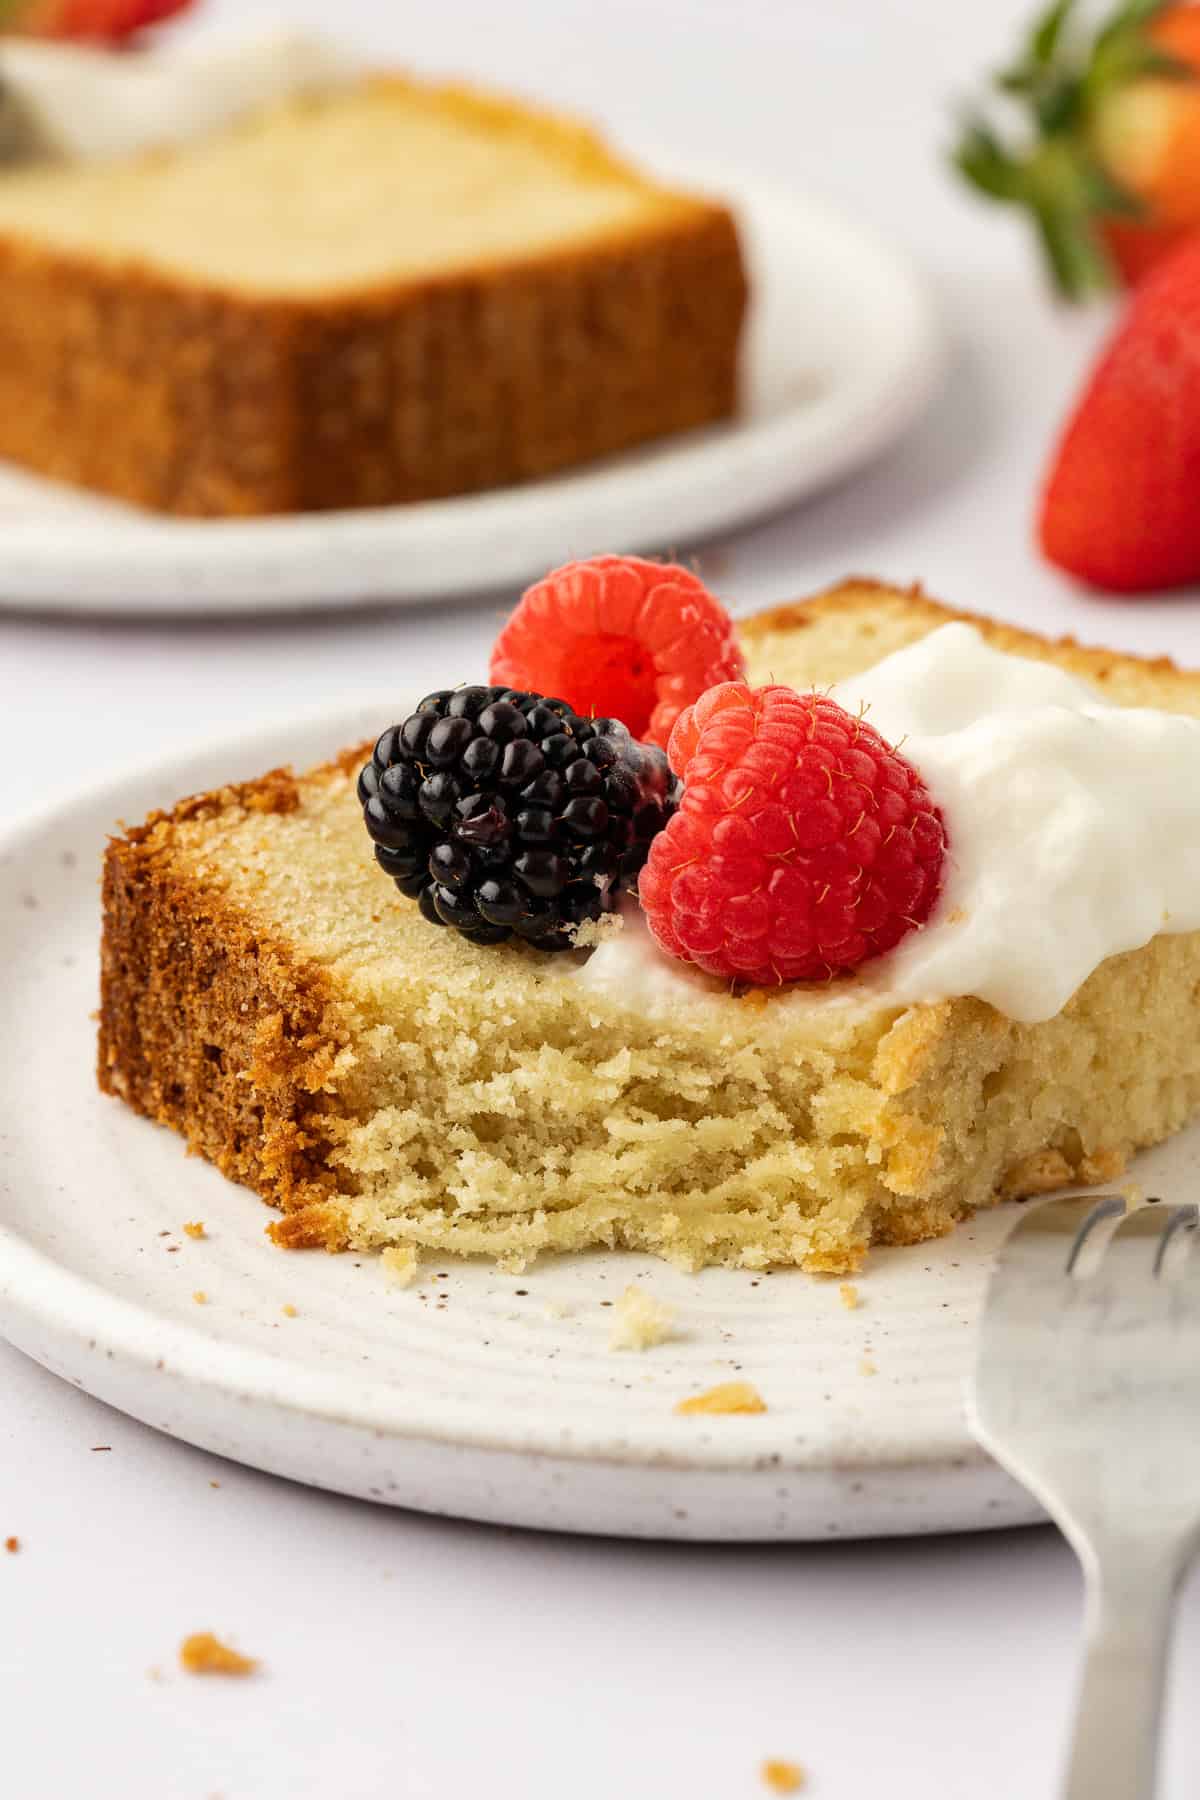 a slice of pound cake topped with whipped cream and fresh berries, with one bite missing a fork leaning on the plate, another slice on a plate and fresh strawberries in the background